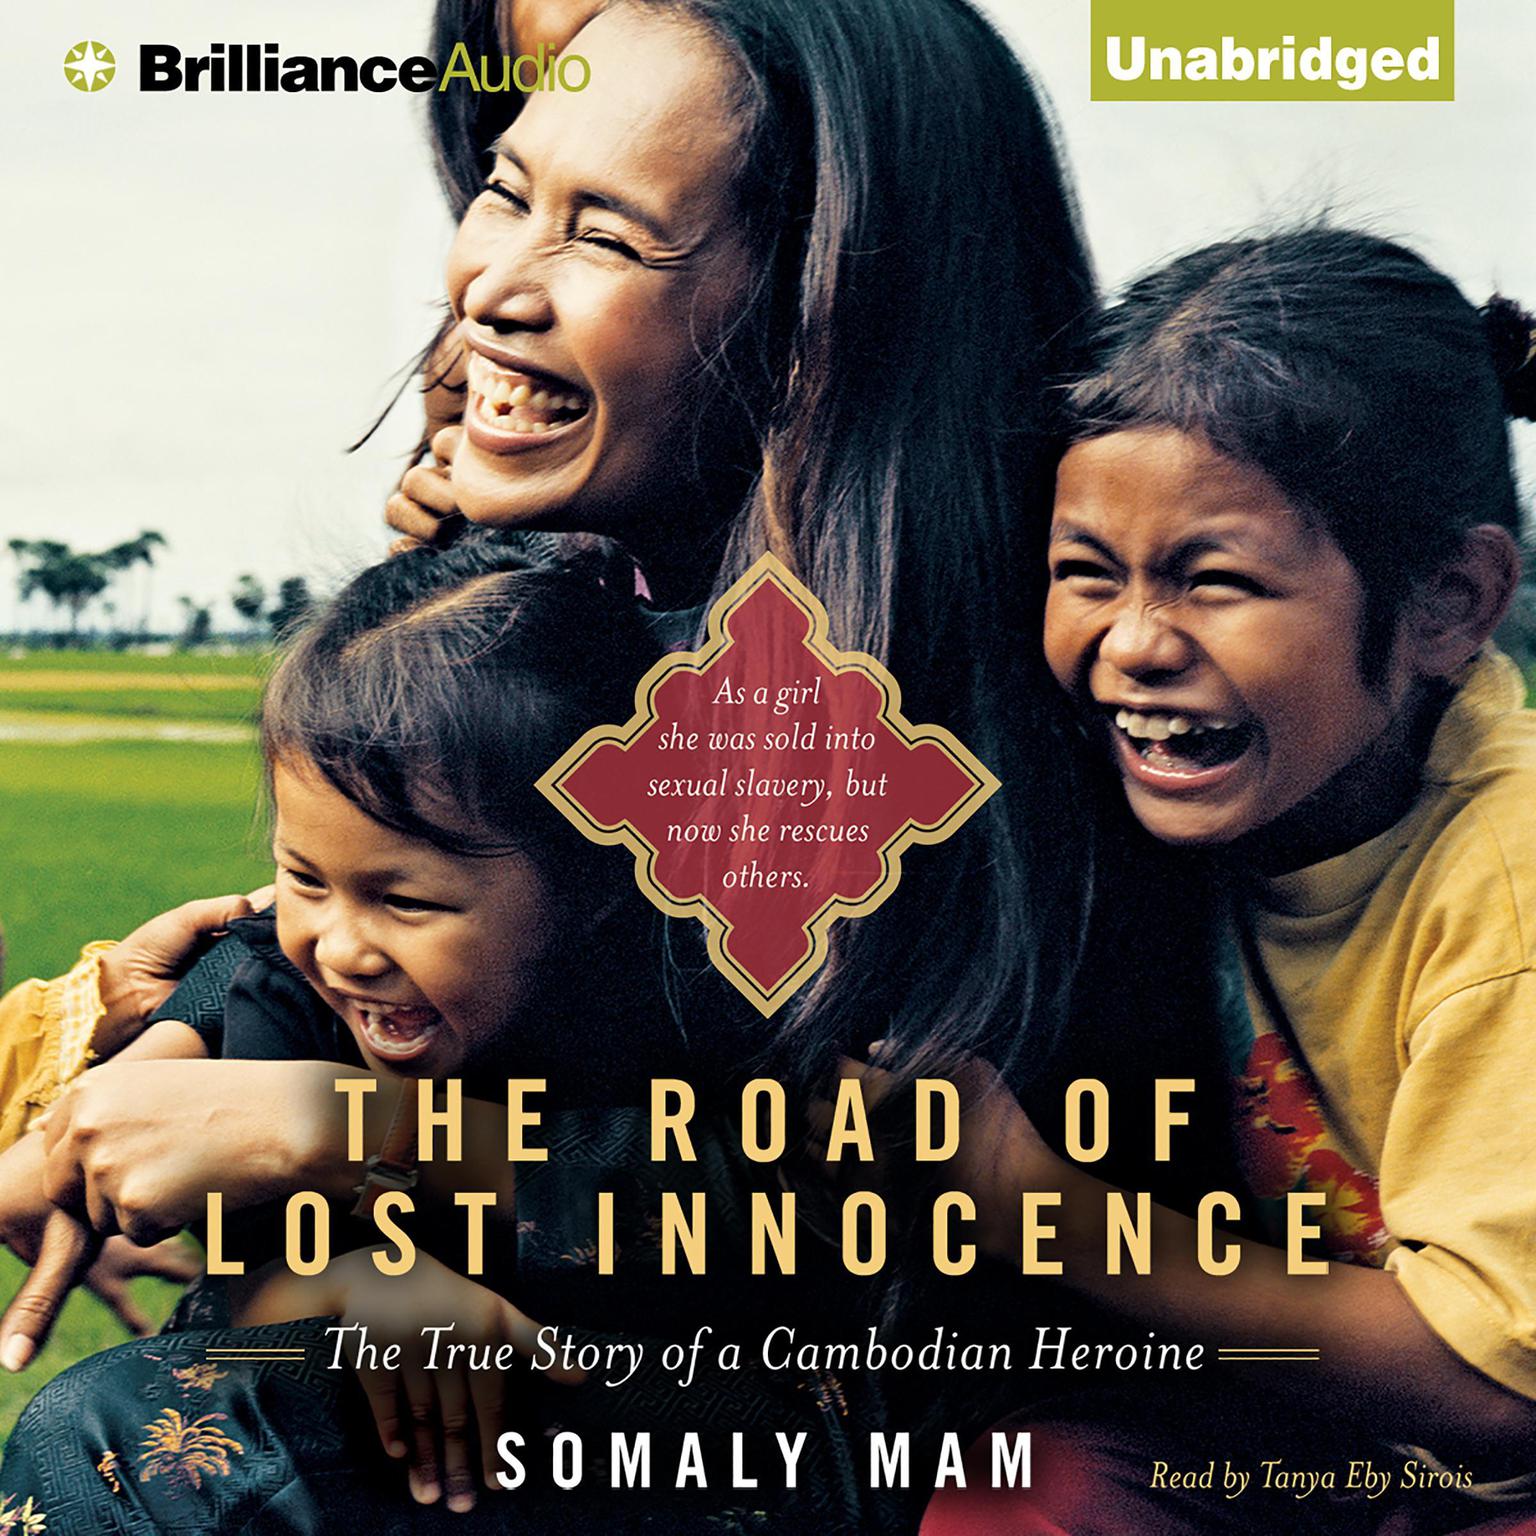 The Road of Lost Innocence: The True Story of a Cambodian Heroine Audiobook, by Somaly Mam